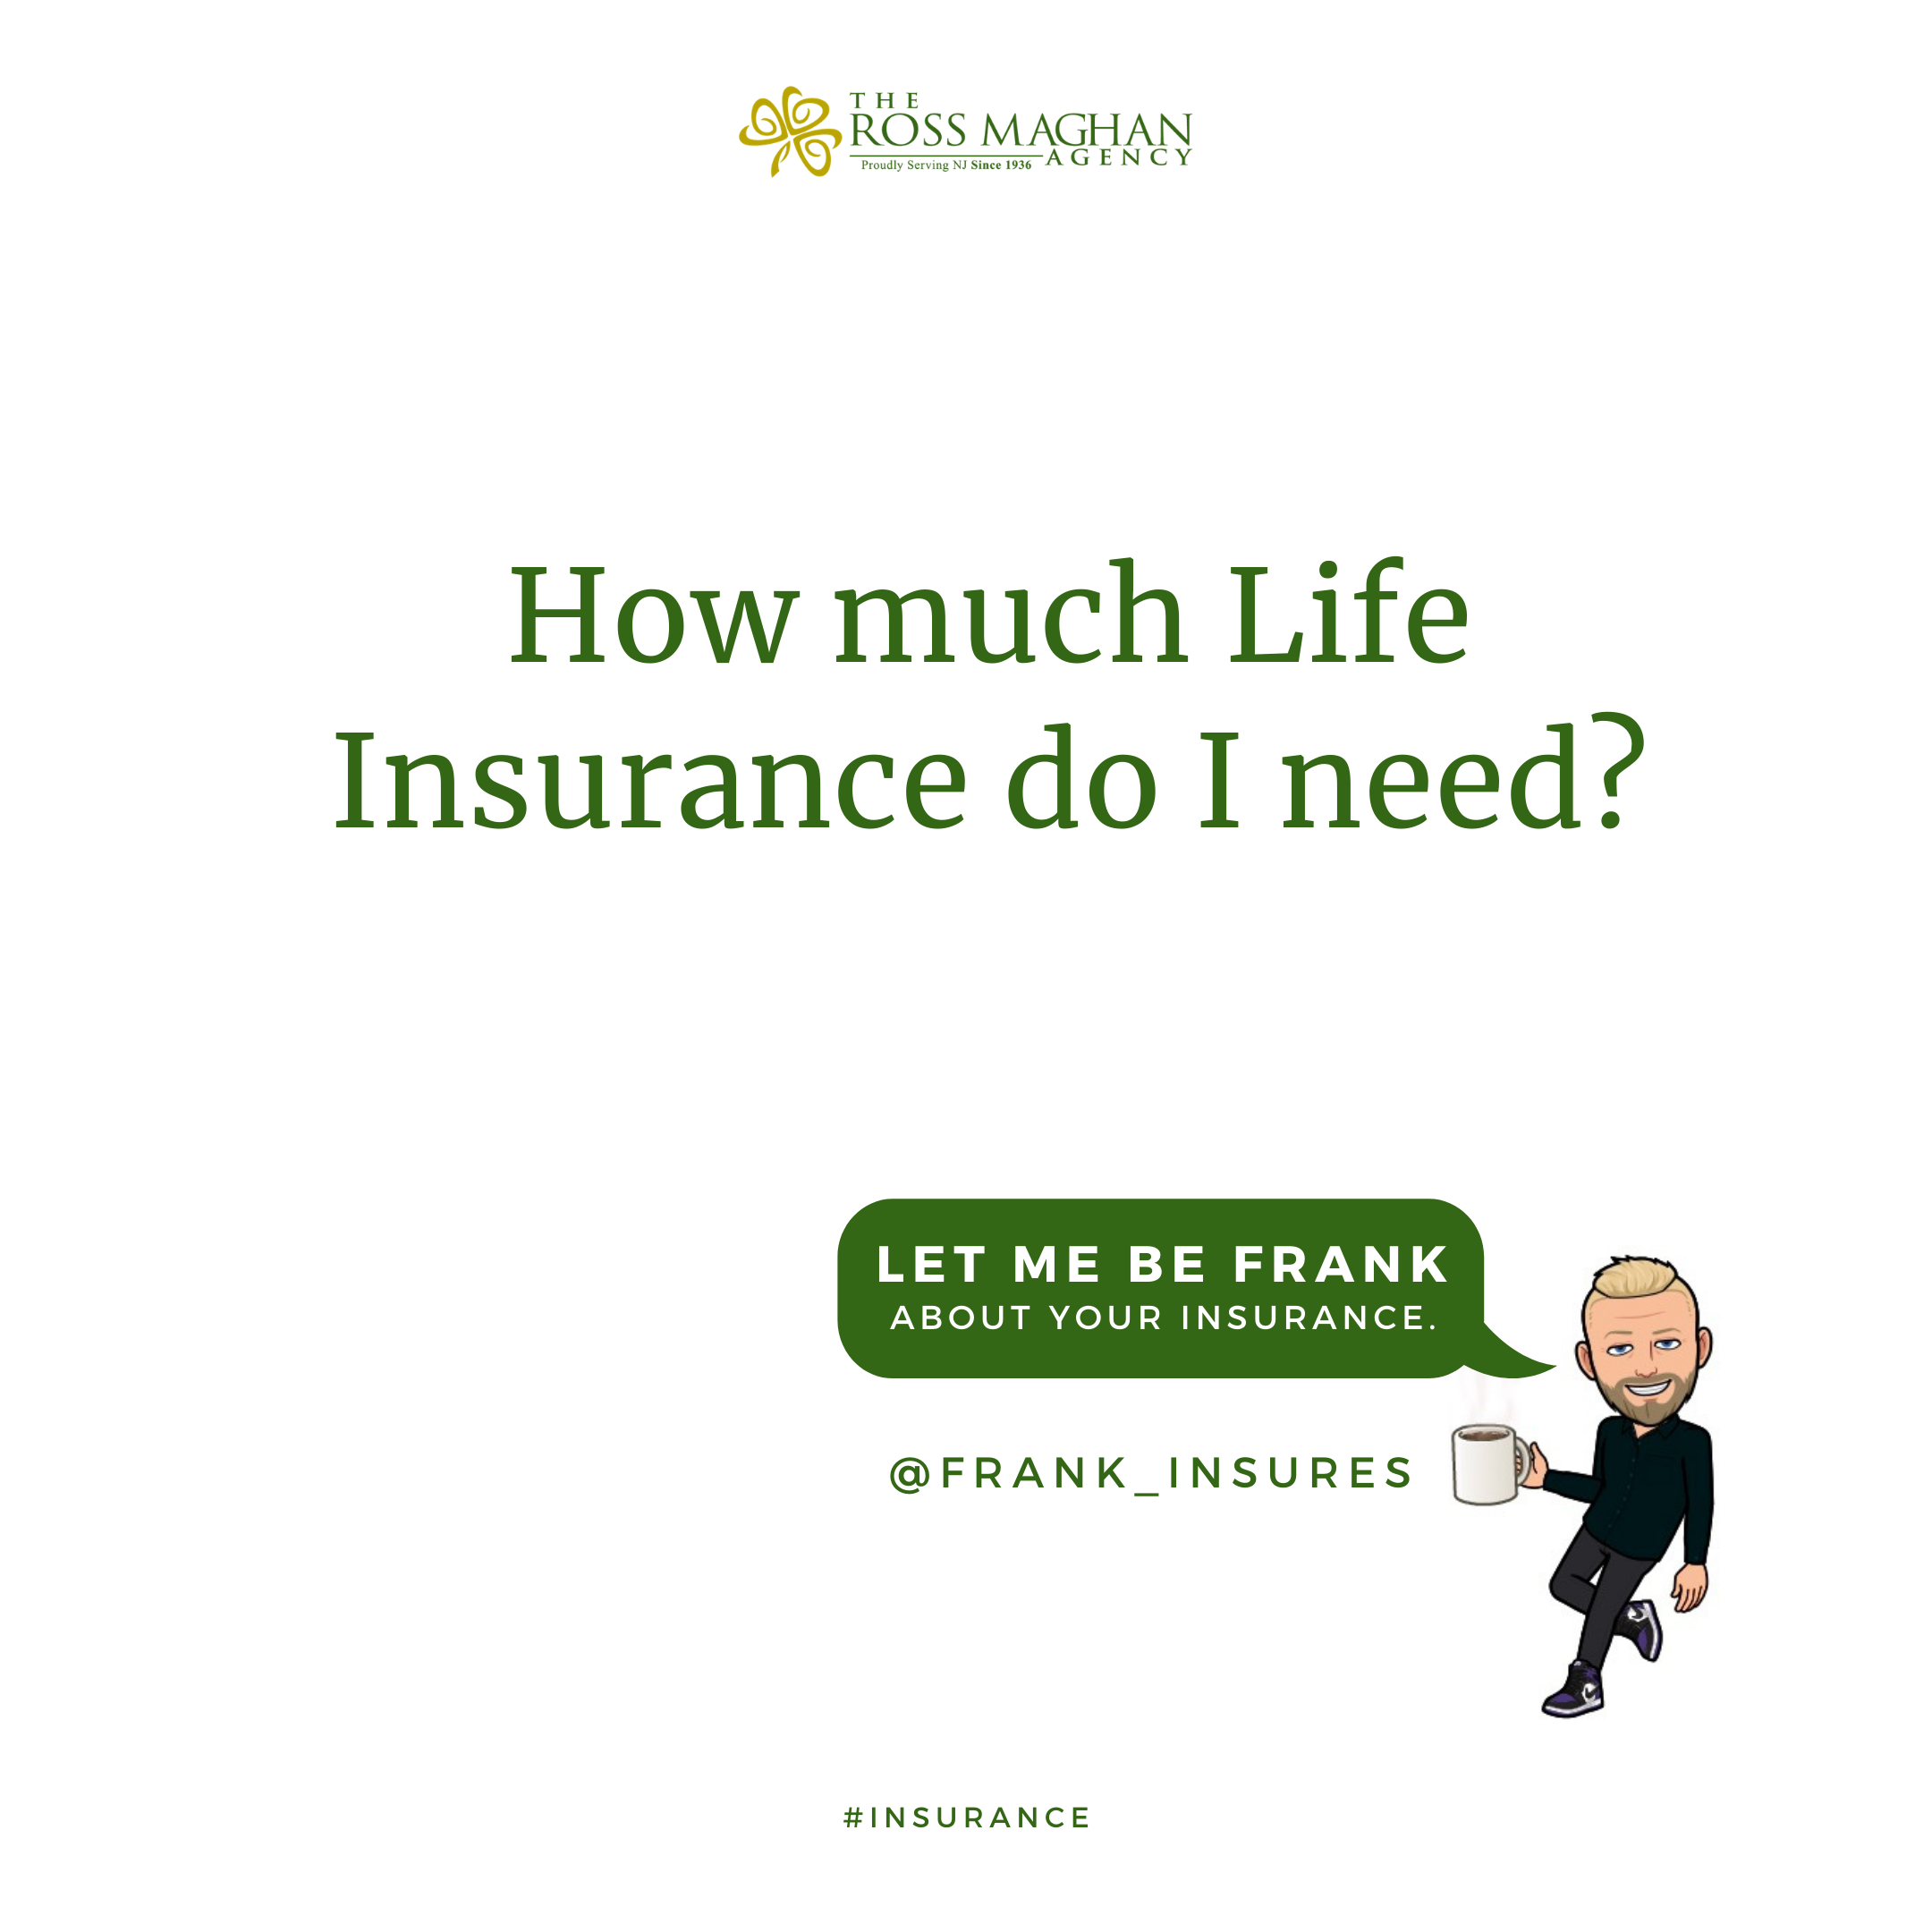 Featured image for “How much Life Insurance do I need?”